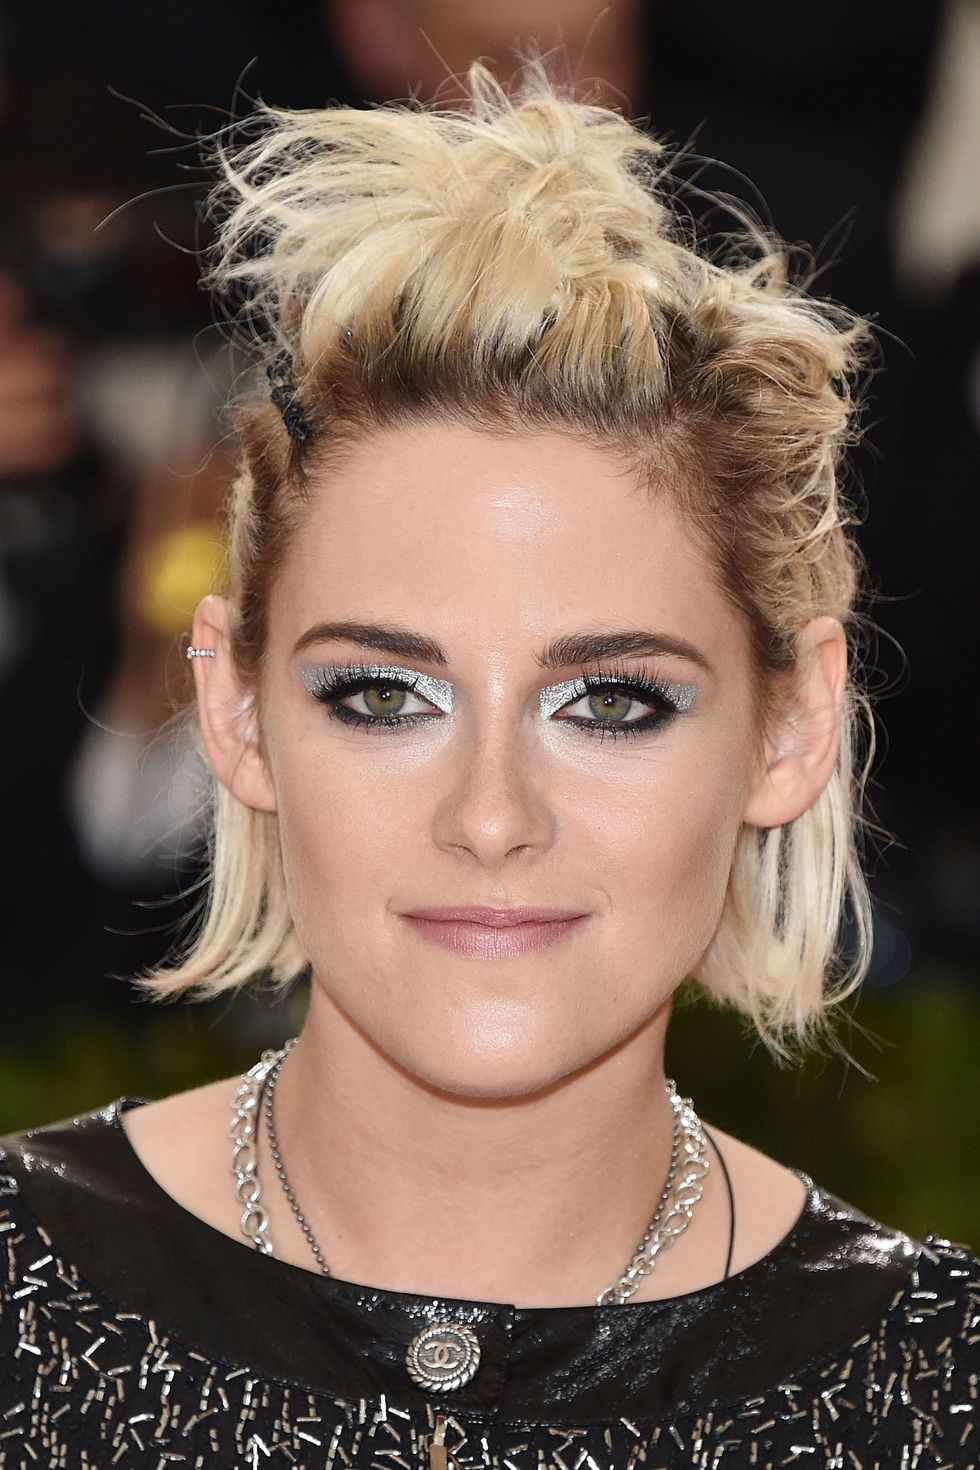 Every single hairstyle Kristen Stewart has ever had